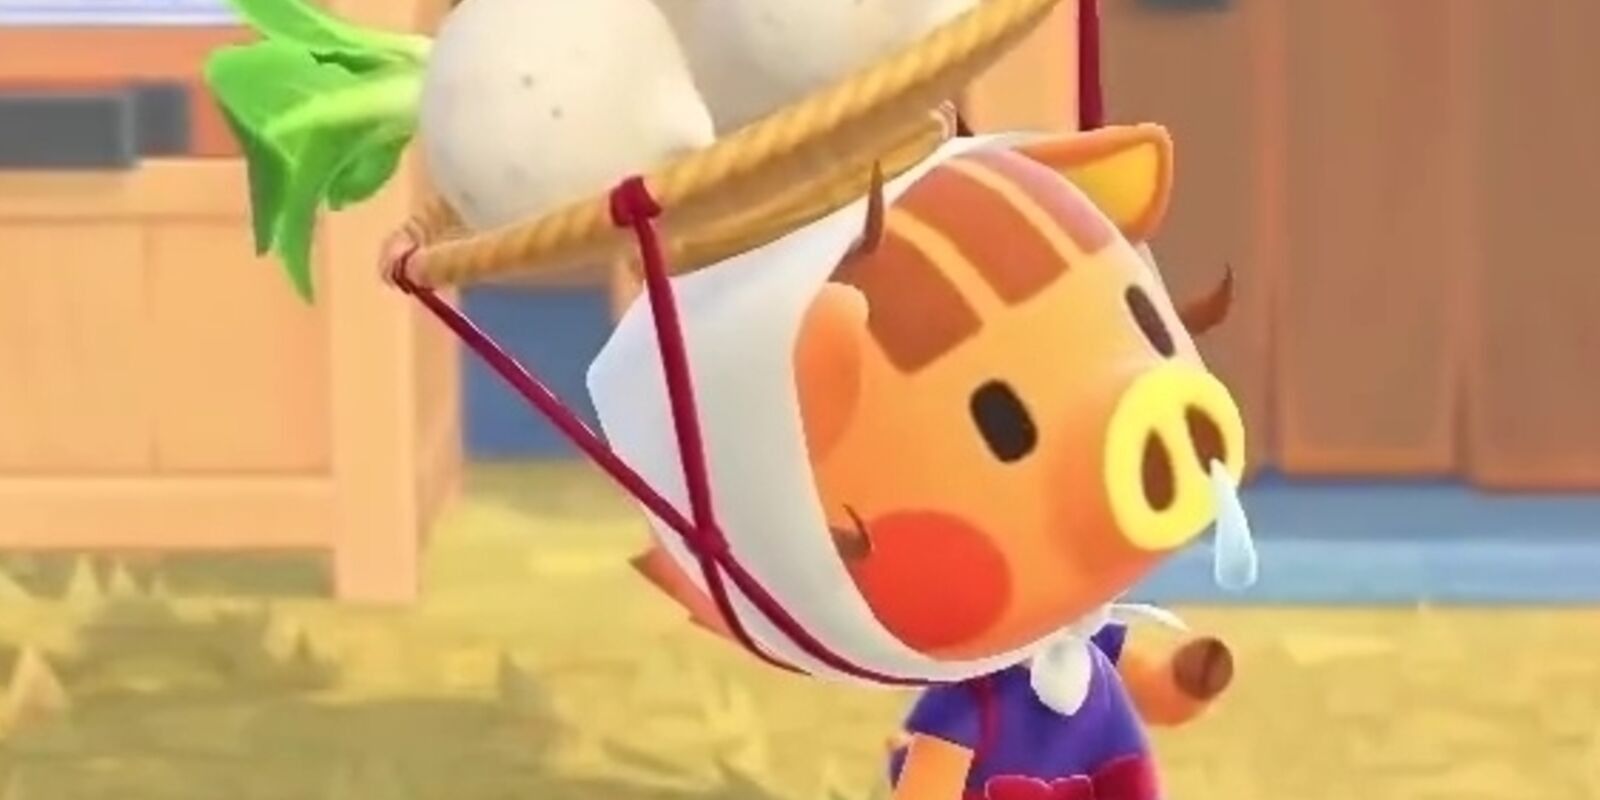 Daisy Mae from Animal Crossing: New Horizons with turnips on her basket hat.